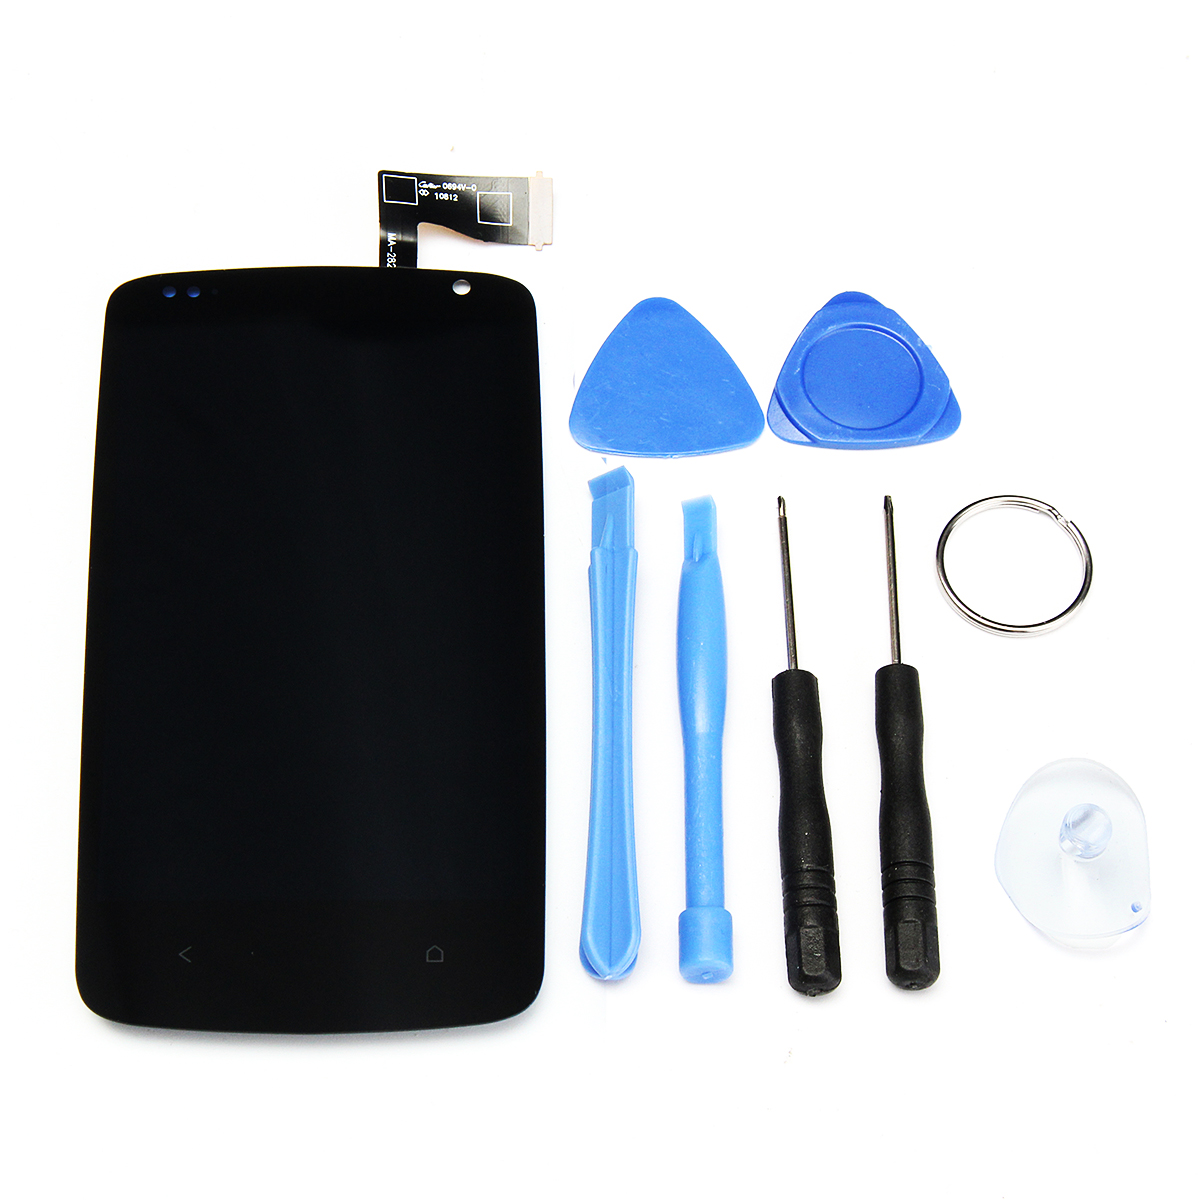 

Touch Screen Digitizer + LCD Display With Repair Tool For HTC Desire 500